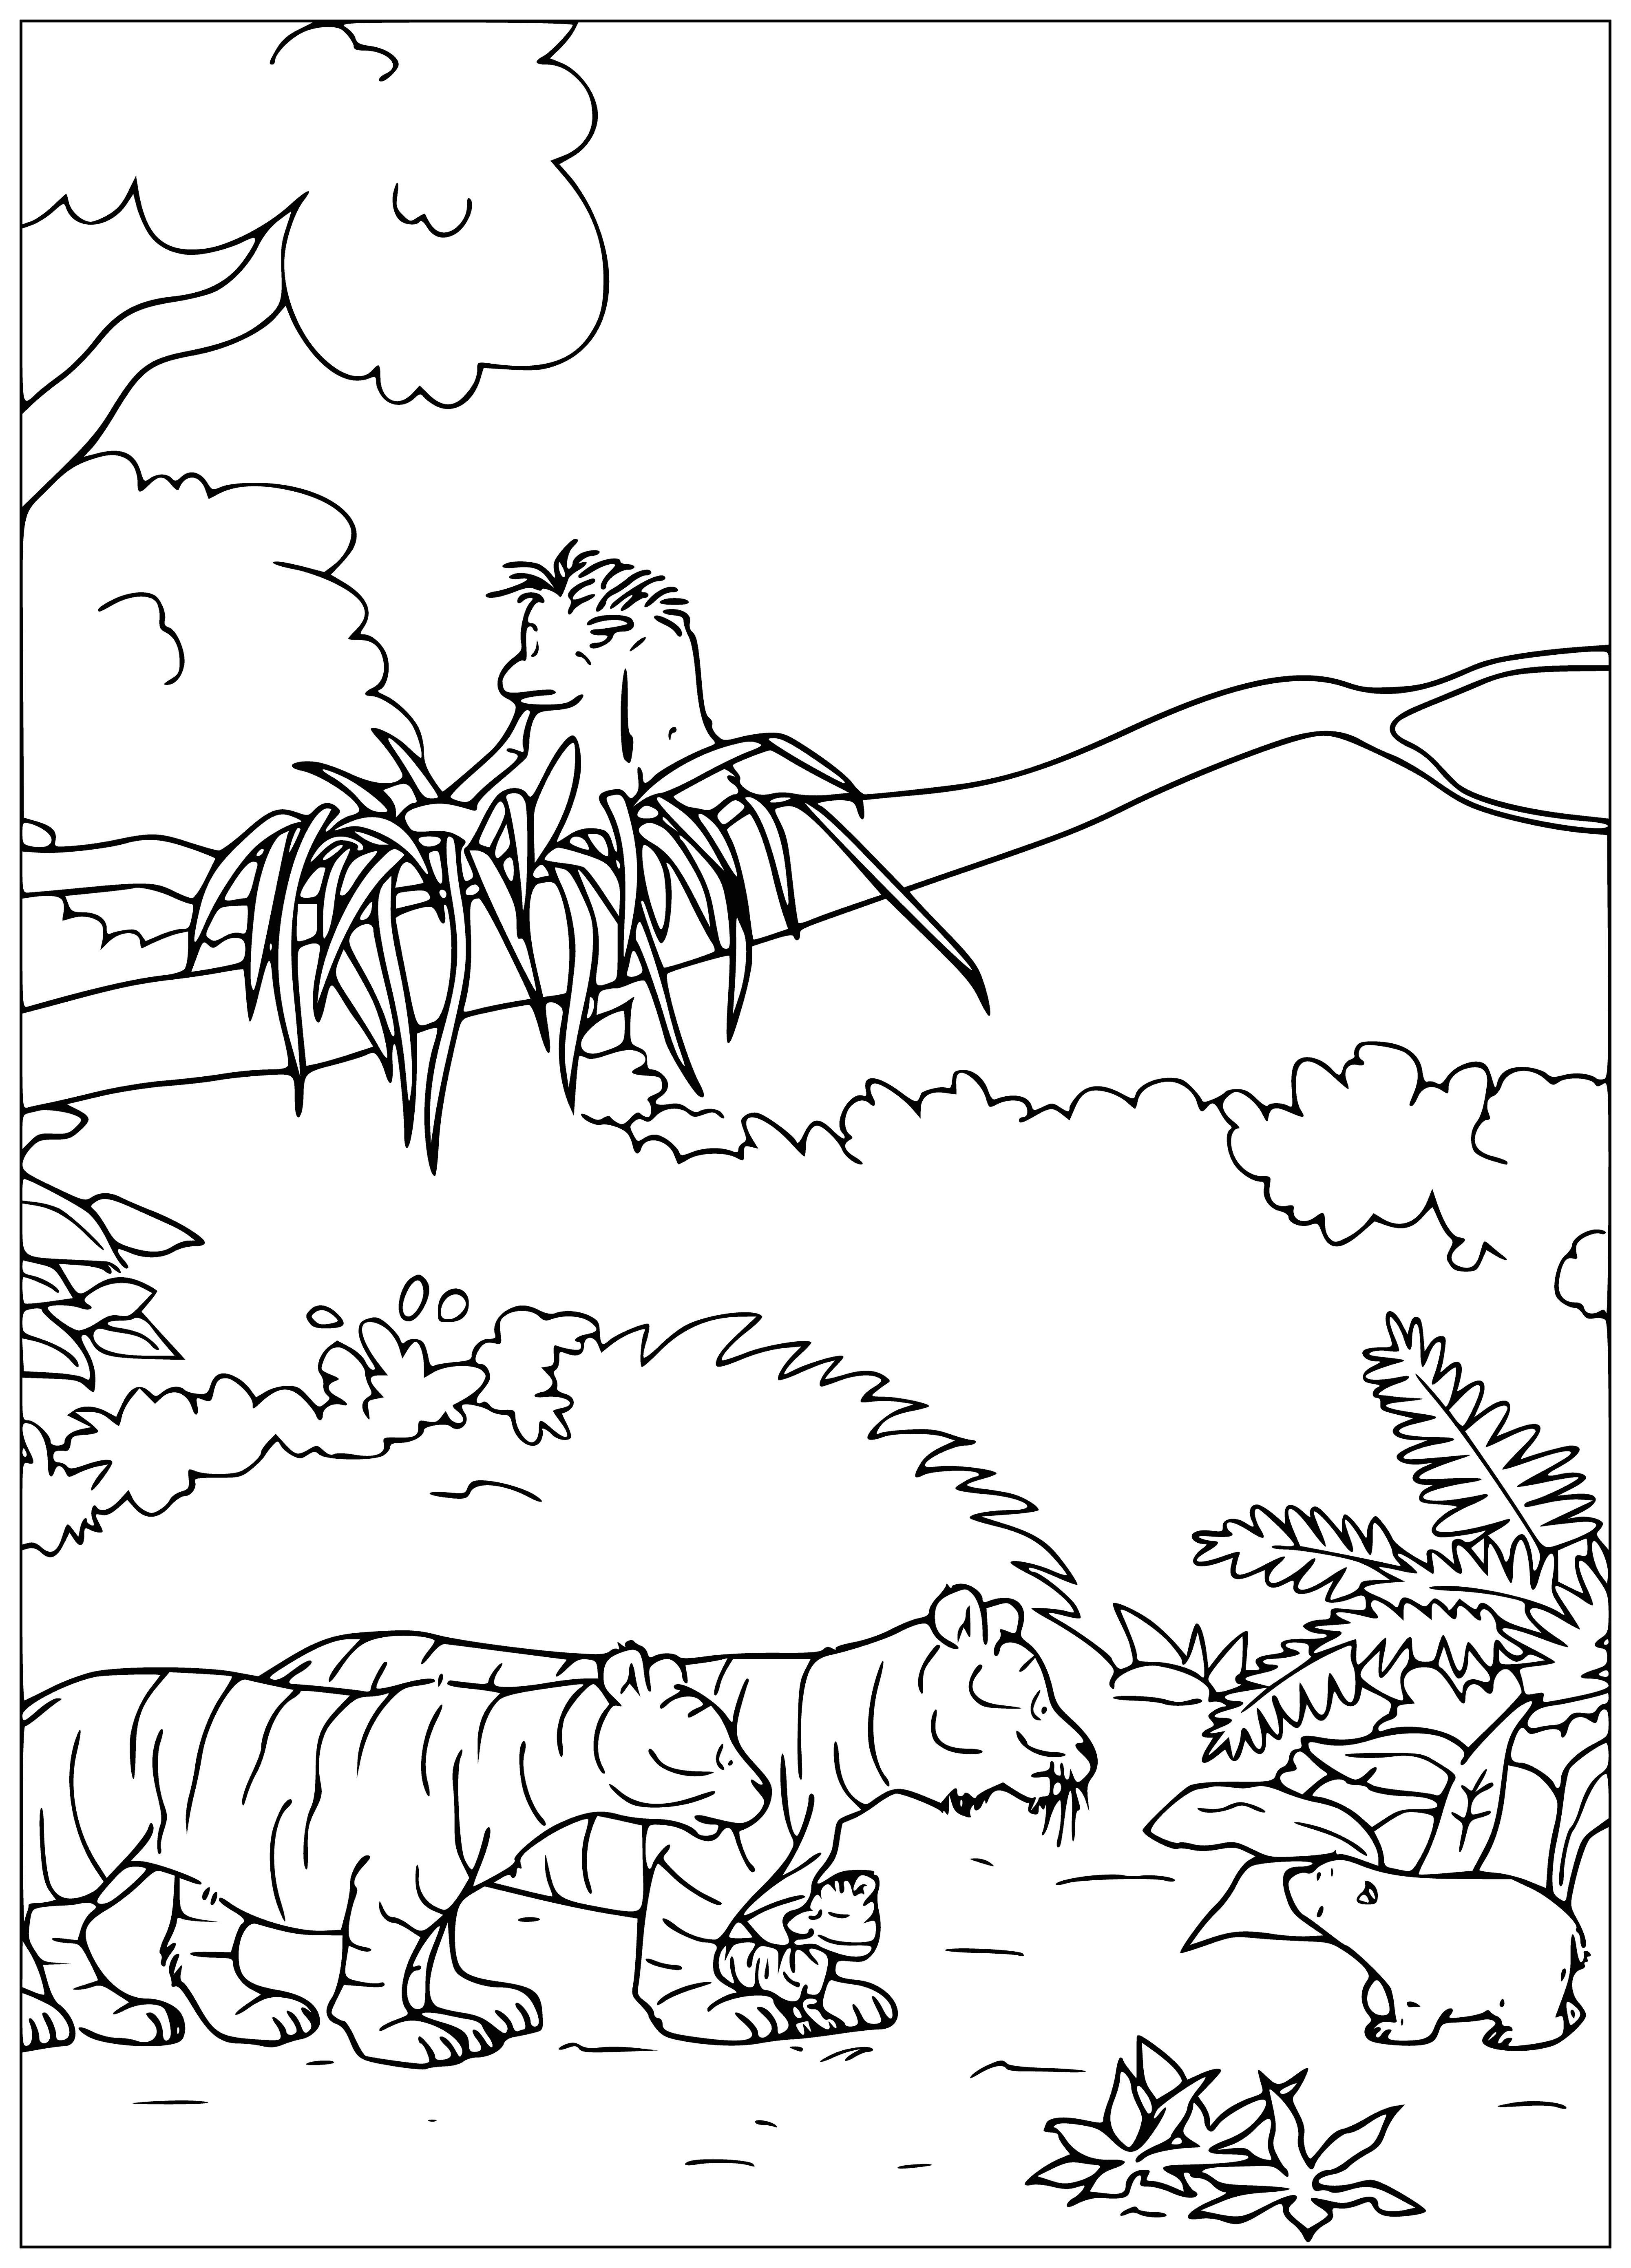 coloring page: Small polar bear cub, white with black spots, protected by parent tiger. Orange with black stripes, mouth open and left paw lifted, claws shown.